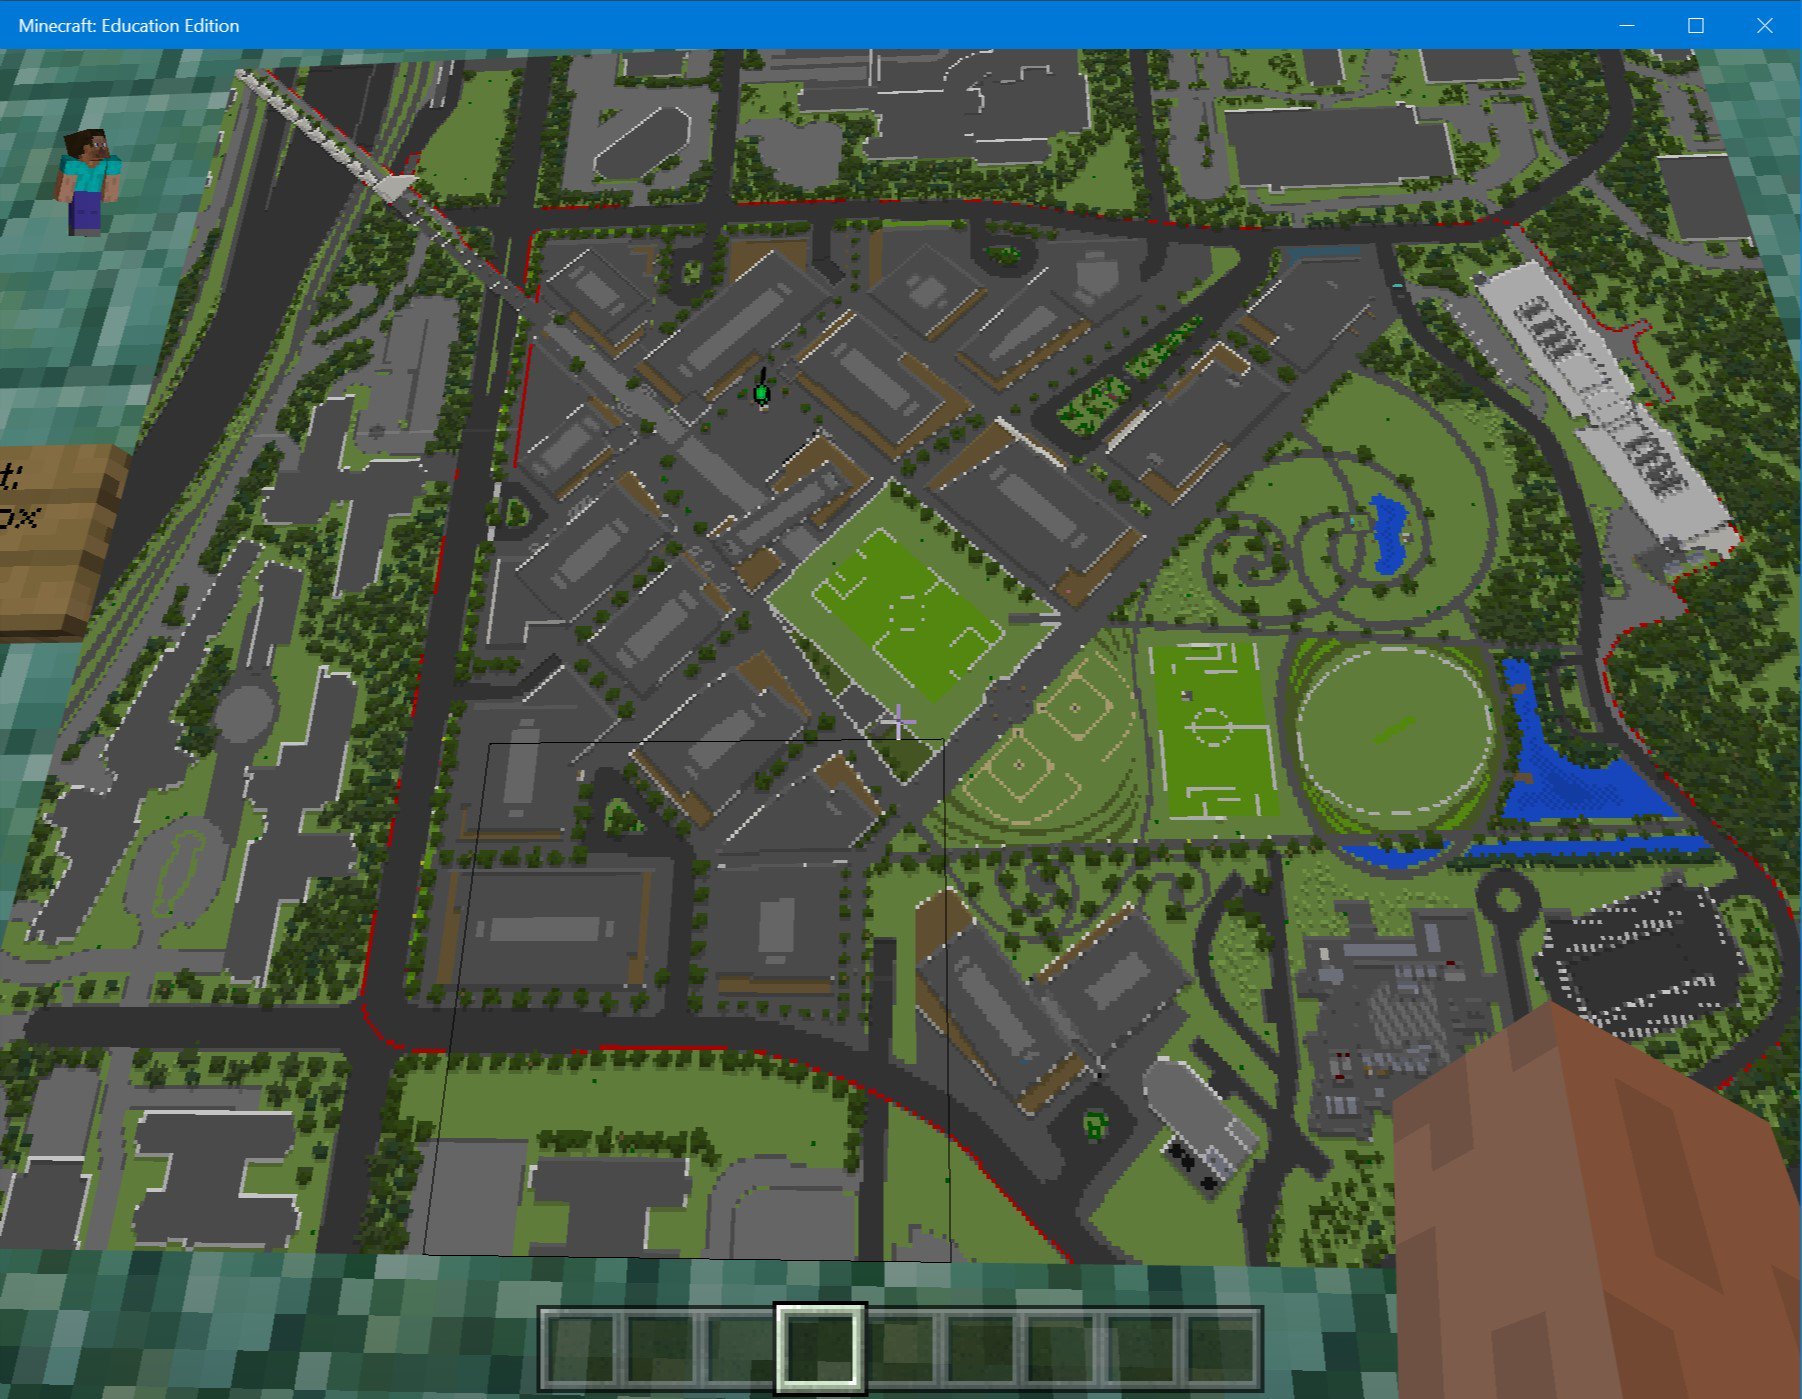 Microsoft mocks up new campus in Minecraft, and you can visit!